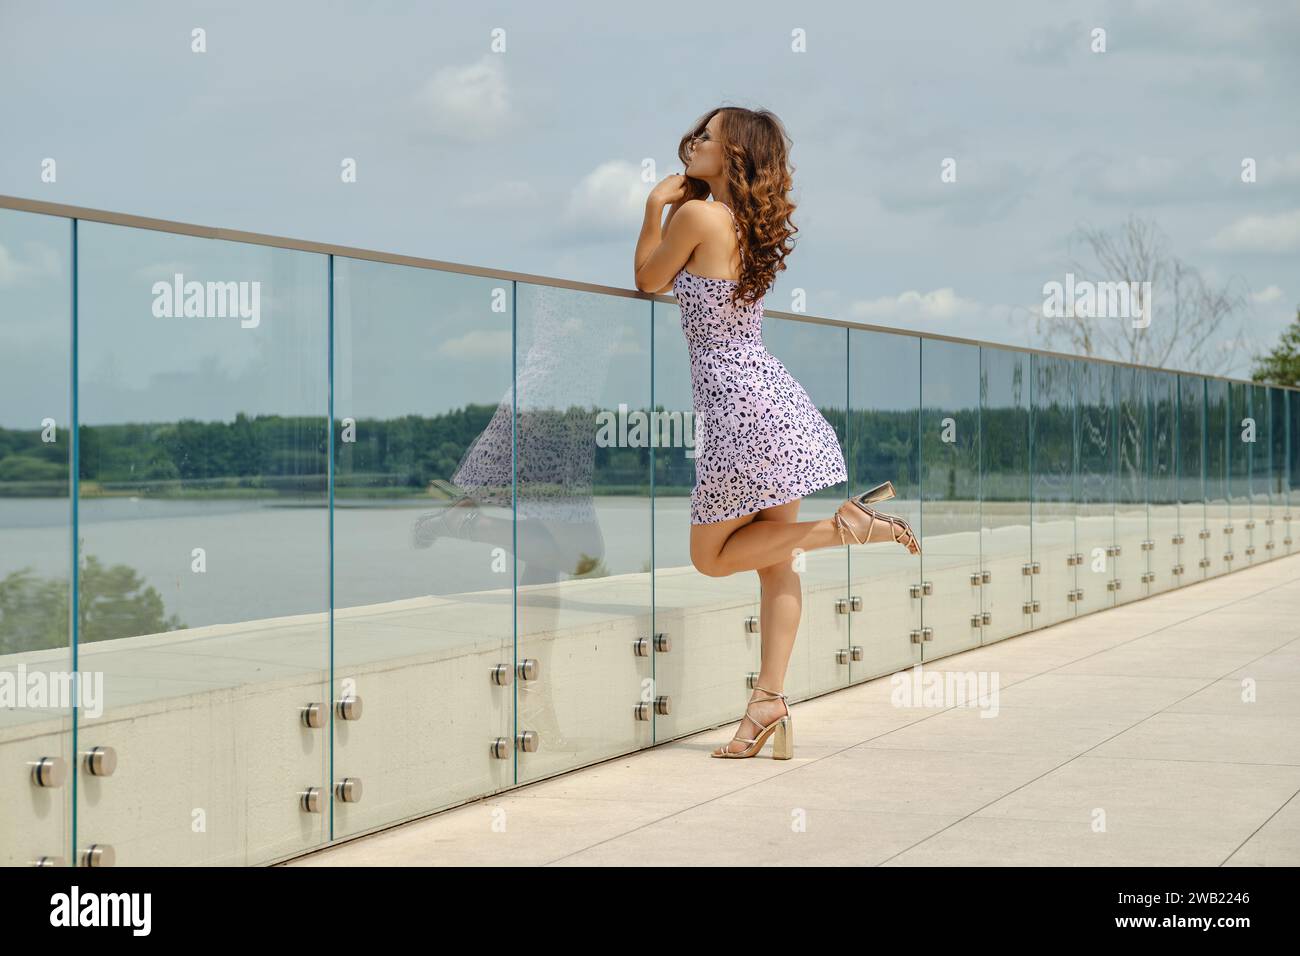 Slender woman in sundress with straps leans on glass railing of observation deck Stock Photo